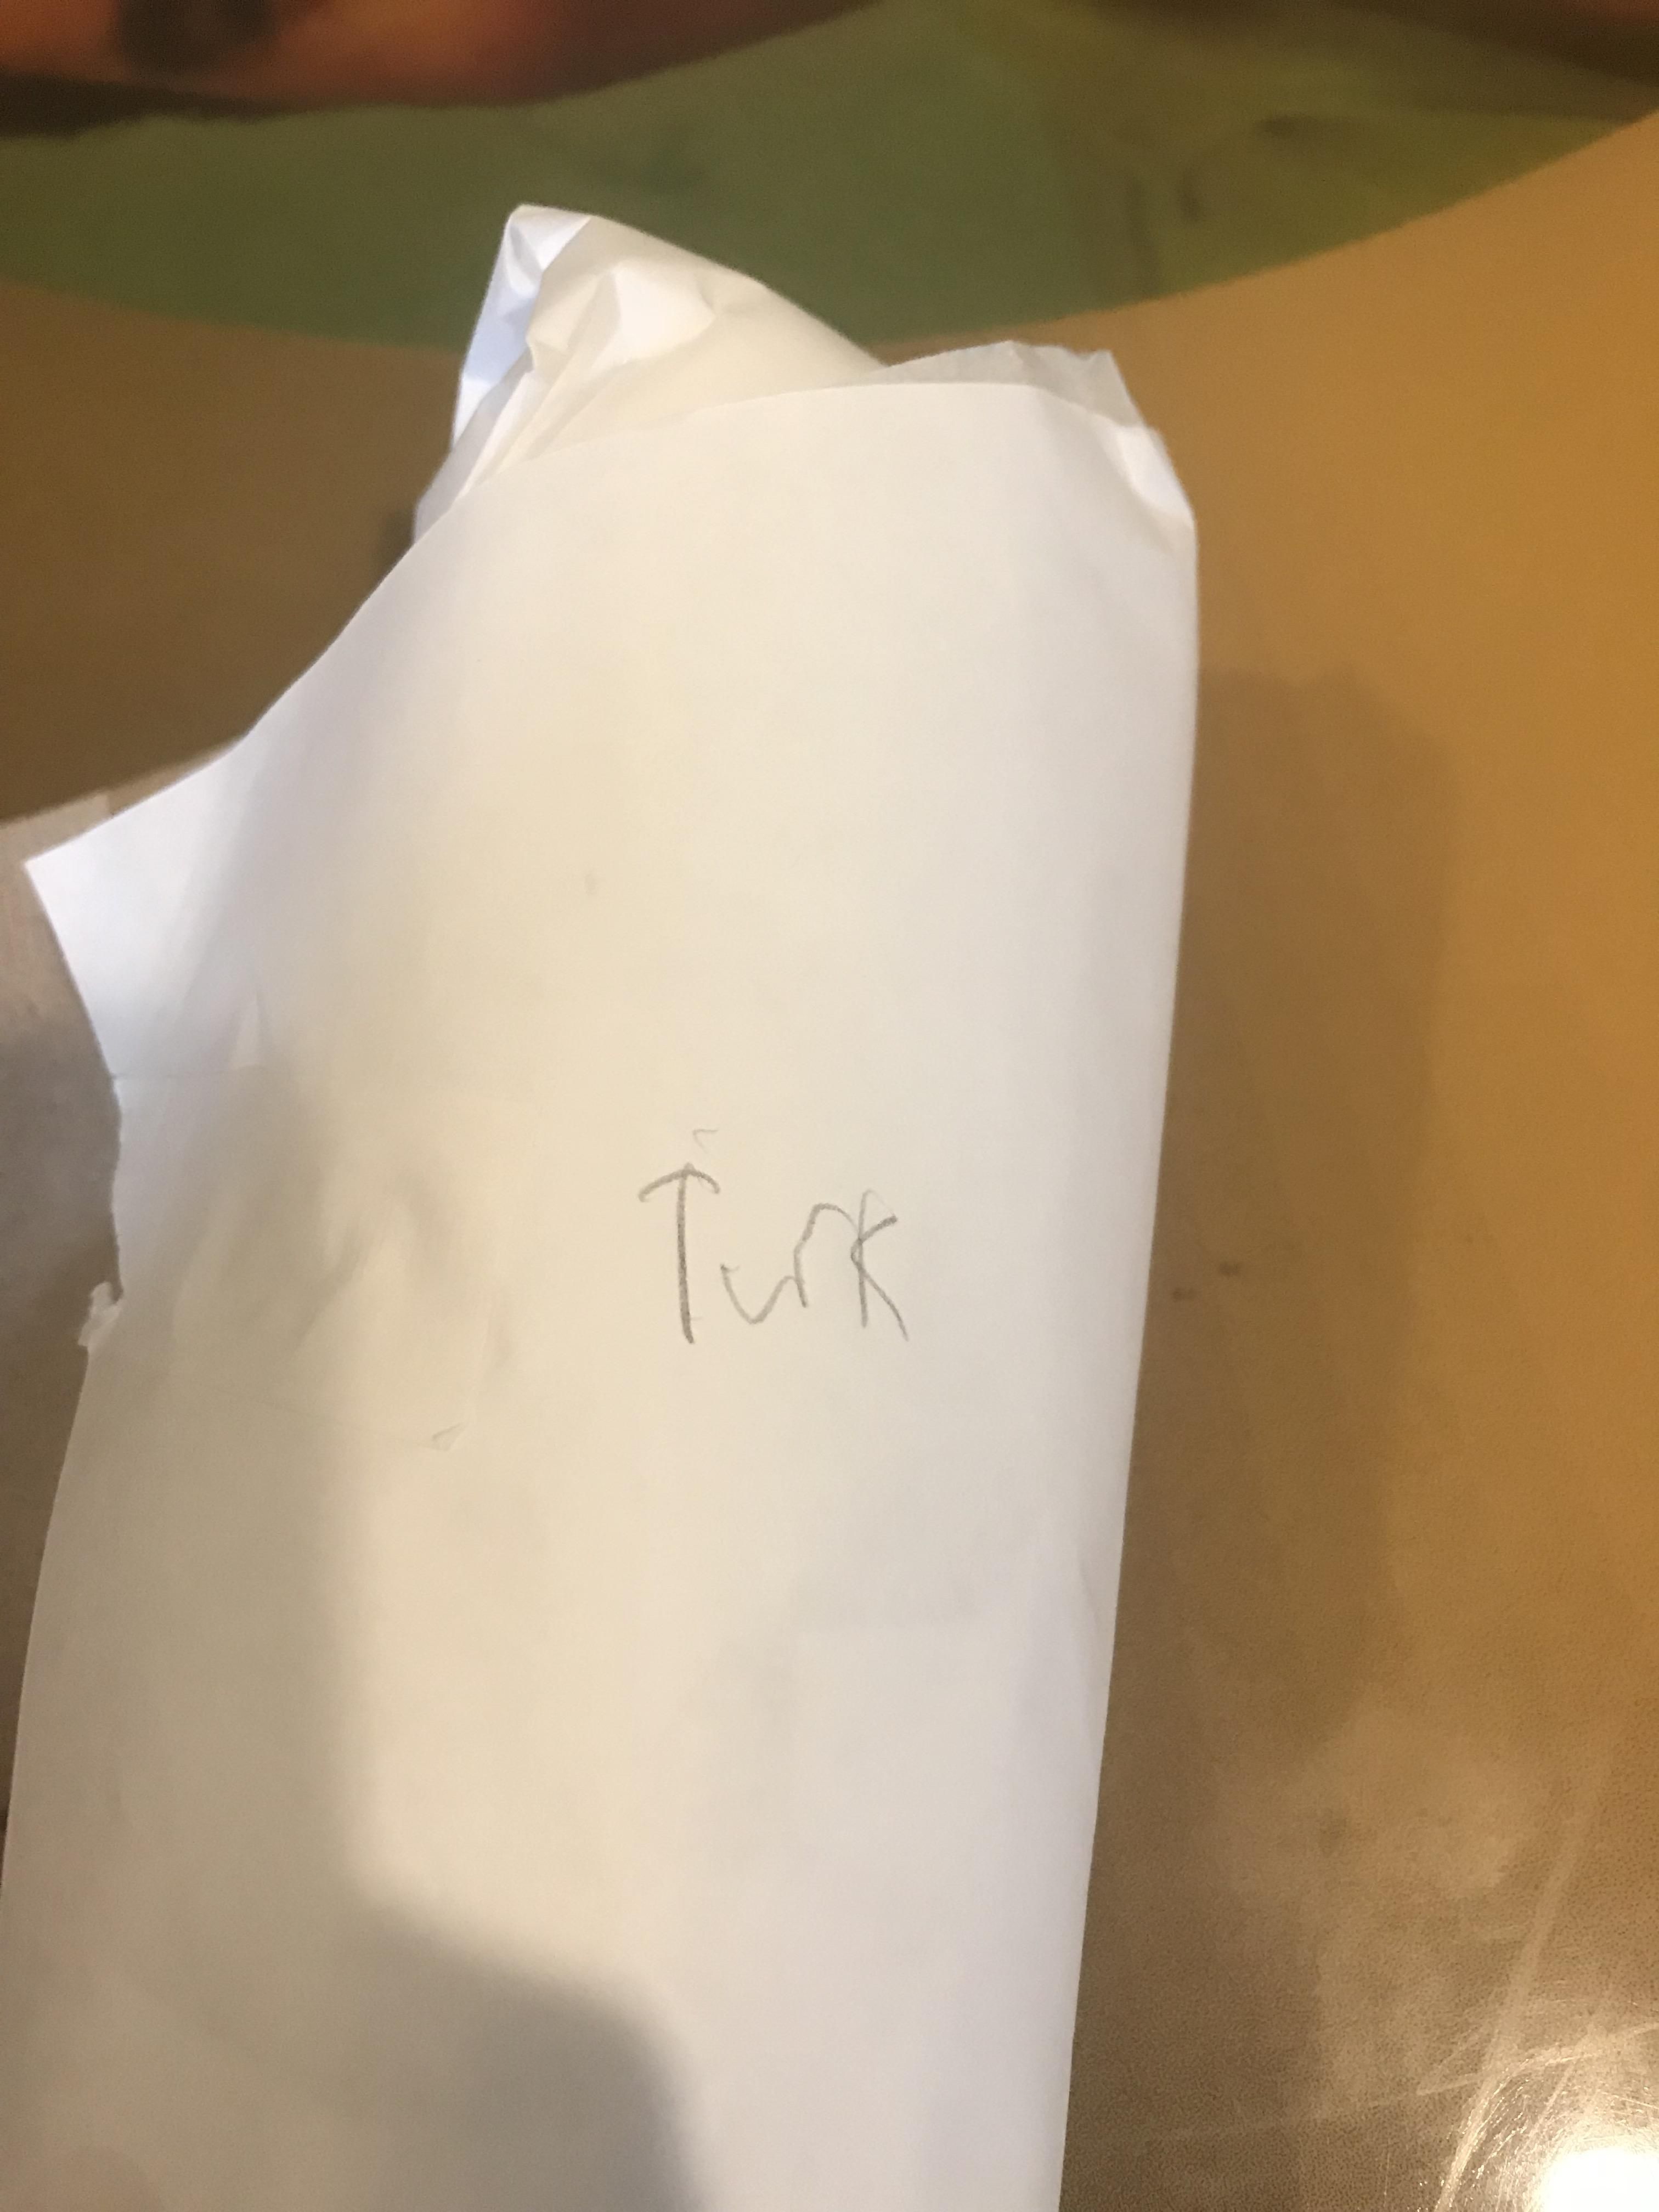 Im Turkish and have a thick accent and was really offended then I remembered I got a turkey club